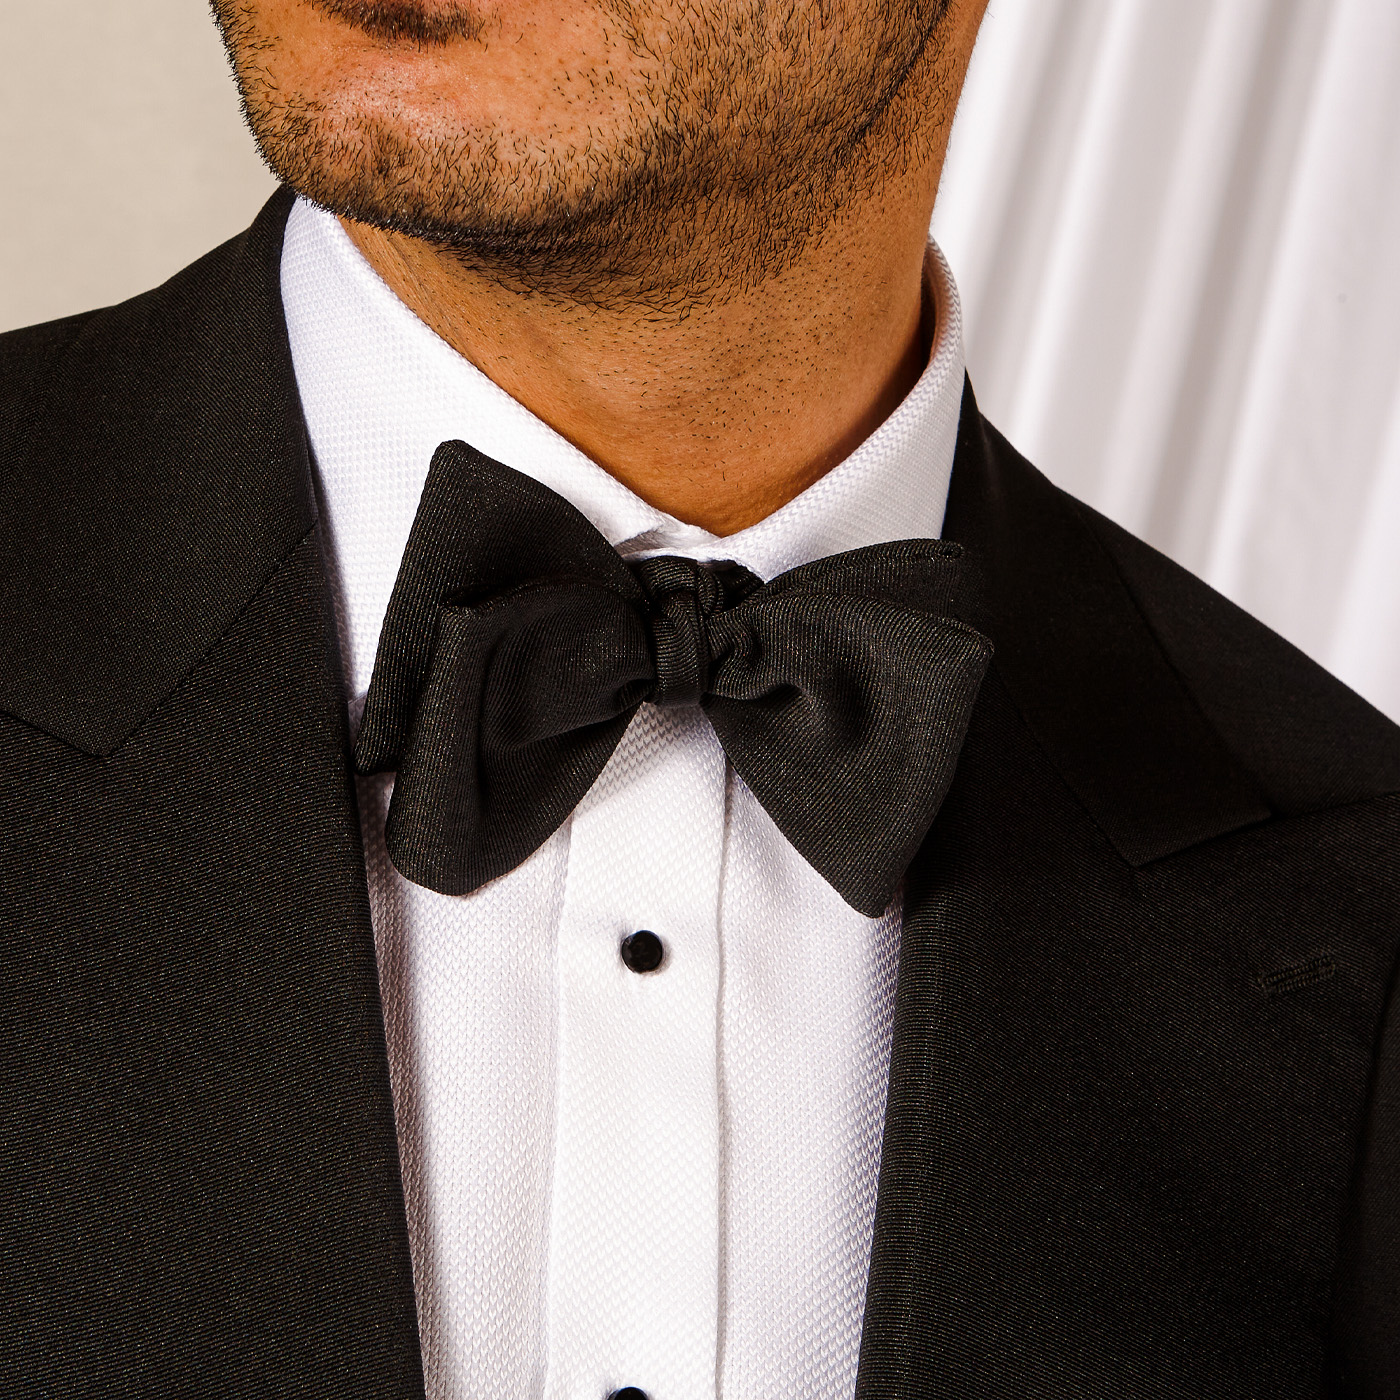 How To Wear A Bow Tie | lupon.gov.ph